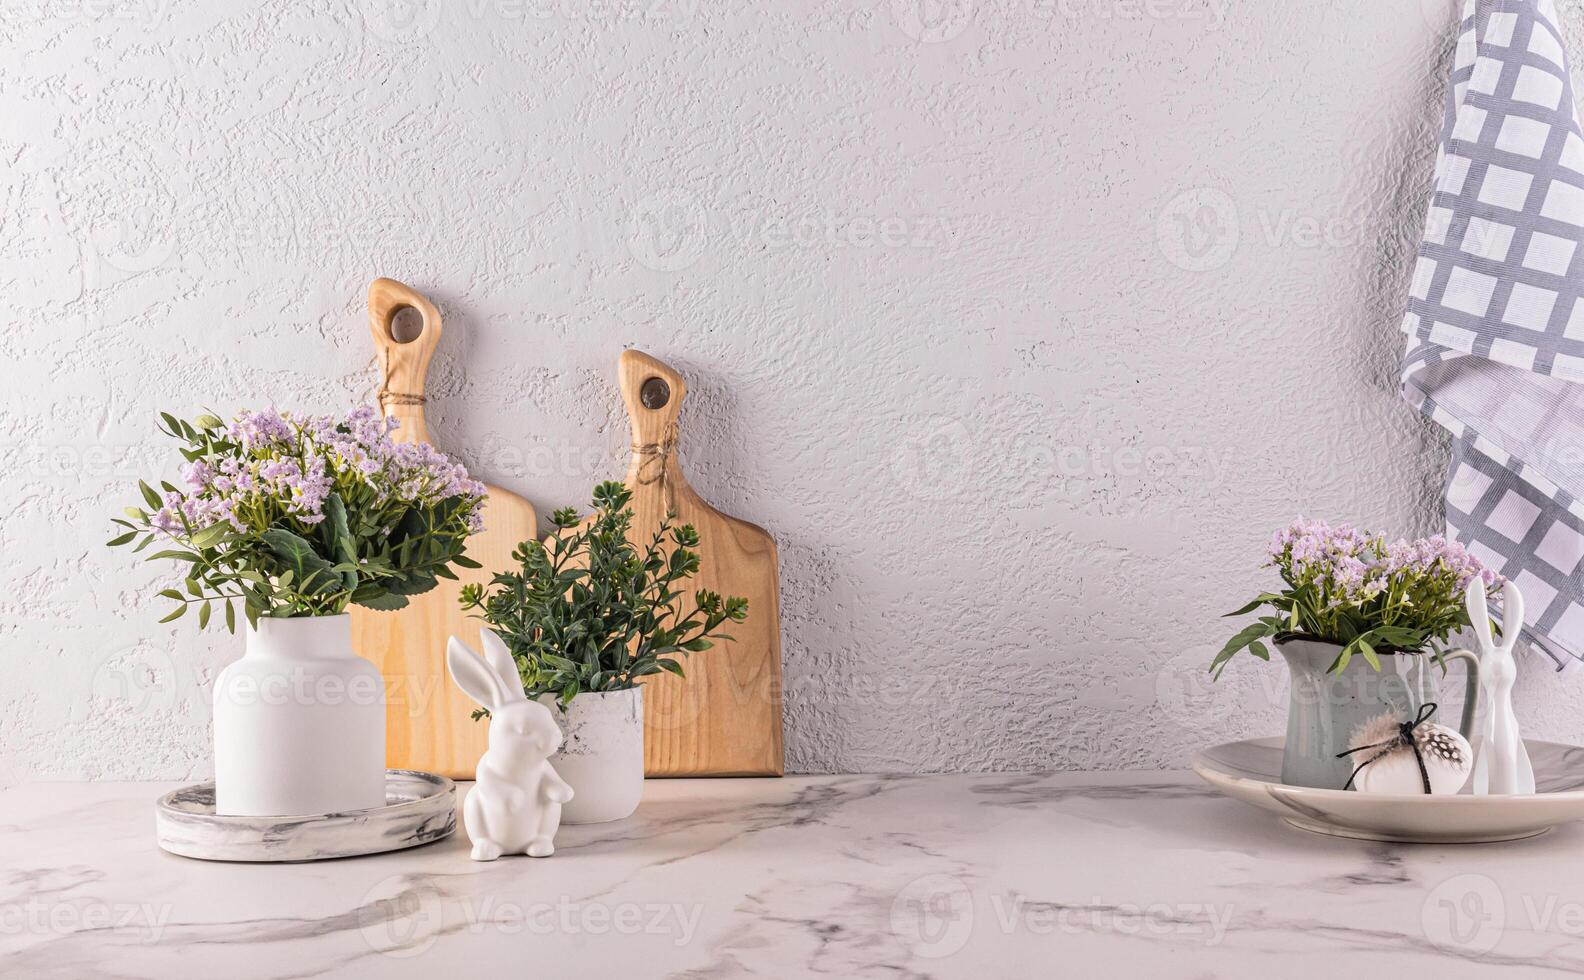 Spring flowers in vase and jug on kitchen countertop with Easter decorations. cutting boards, towels. Easter bunny figurines. photo